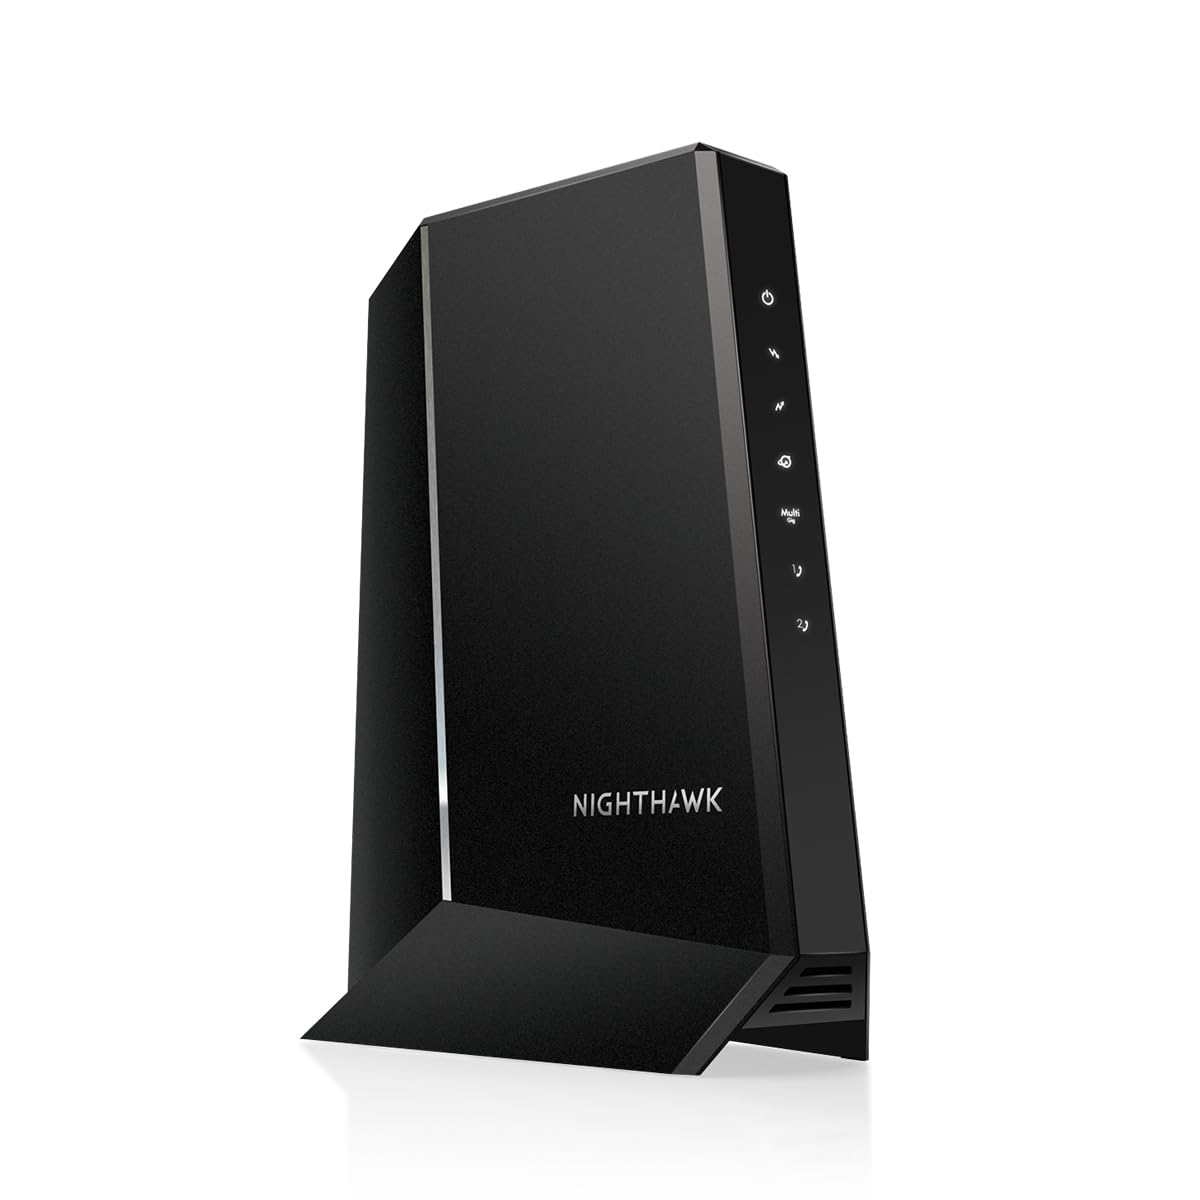 NETGEAR Nighthawk Multi-Gig Cable Modem with Voice CM2050V - for Xfinity Internet & Voice Supports Cable Plans Up to 2.5Gbps 2 Phone Lines DOCSIS 3.1